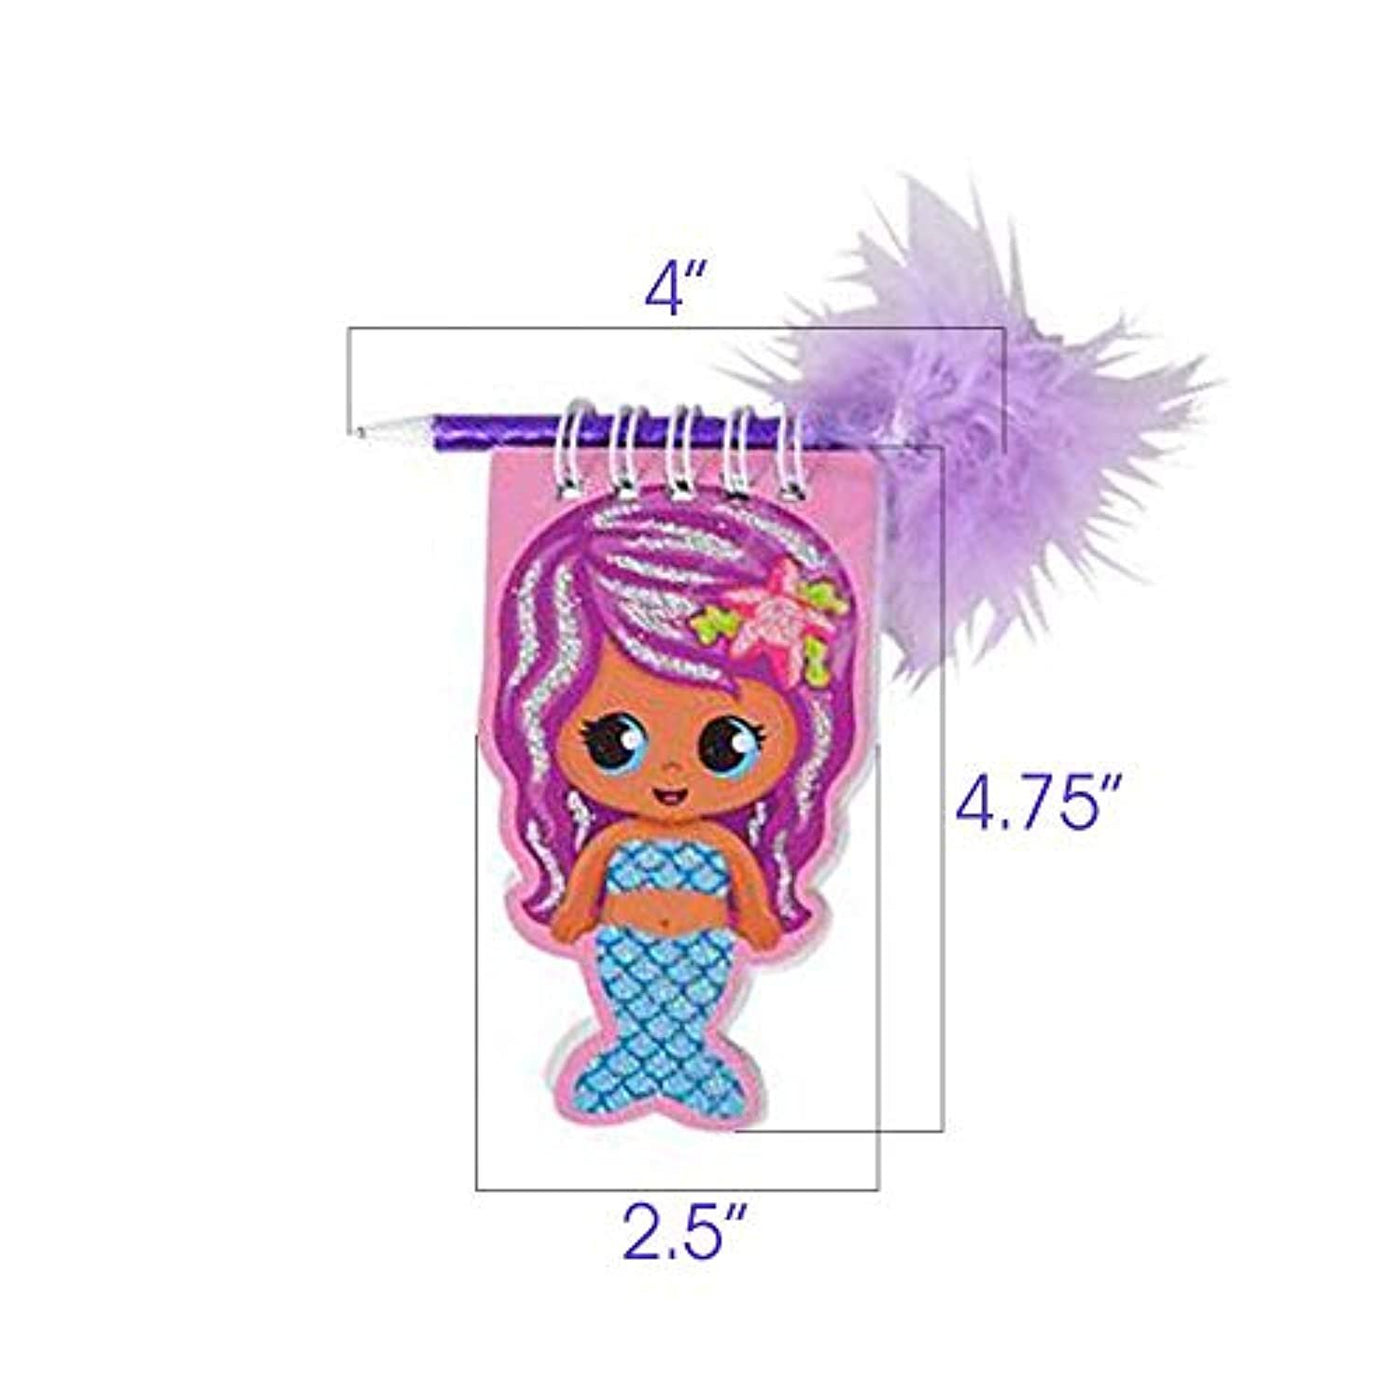 Mermaid Notebook and Pen Set for Kids, Set of 12, Feather-Tipped Pen and Small Glittery Note Pad with Loop Pen Holder Per Set, Fun Stationery Party Favors, Goodie Bag Fillers, Teacher Rewards